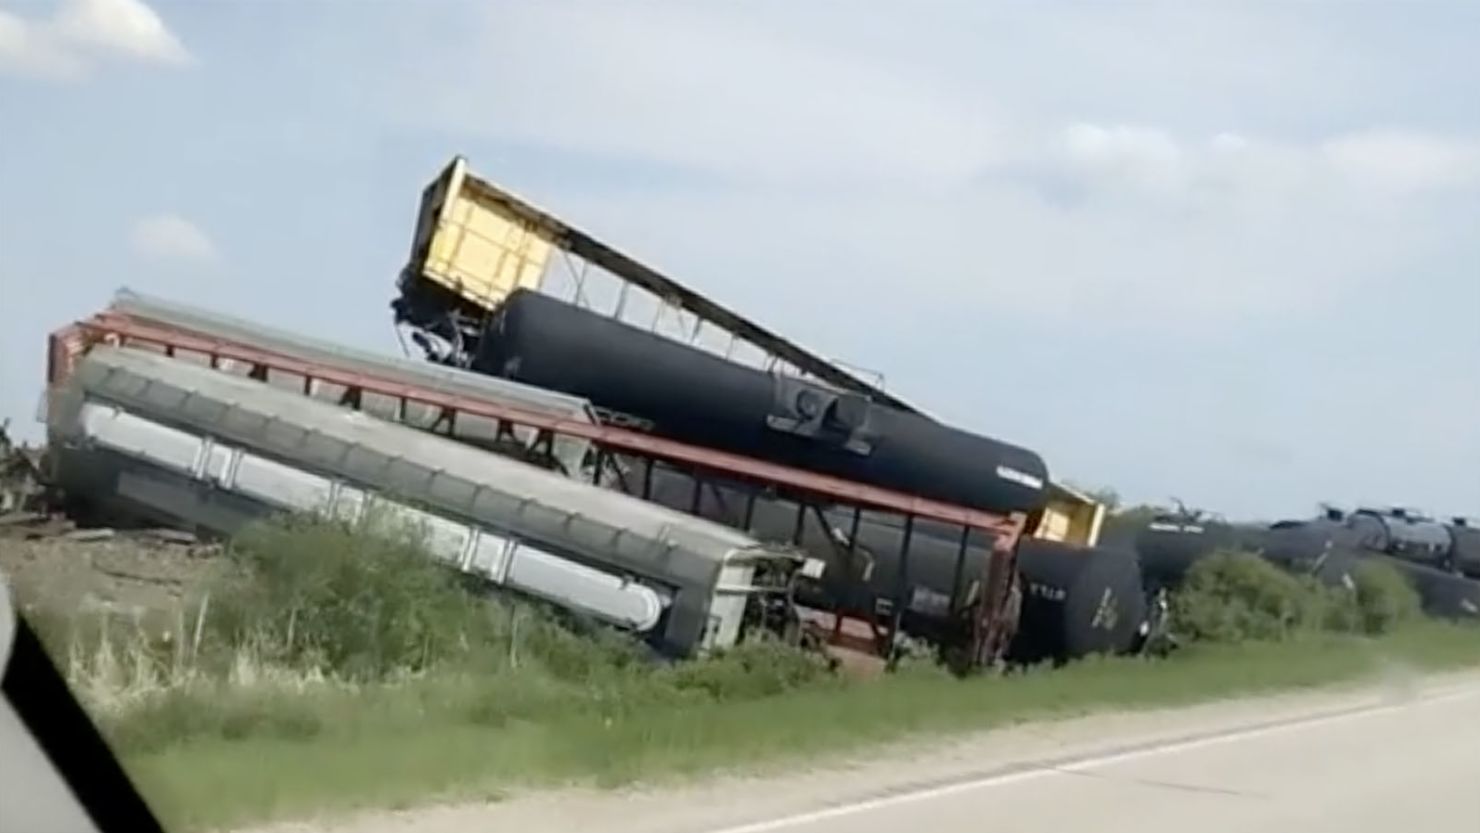 A train derailed in northwestern Minnesota just south of the Canadian border Wednesday.